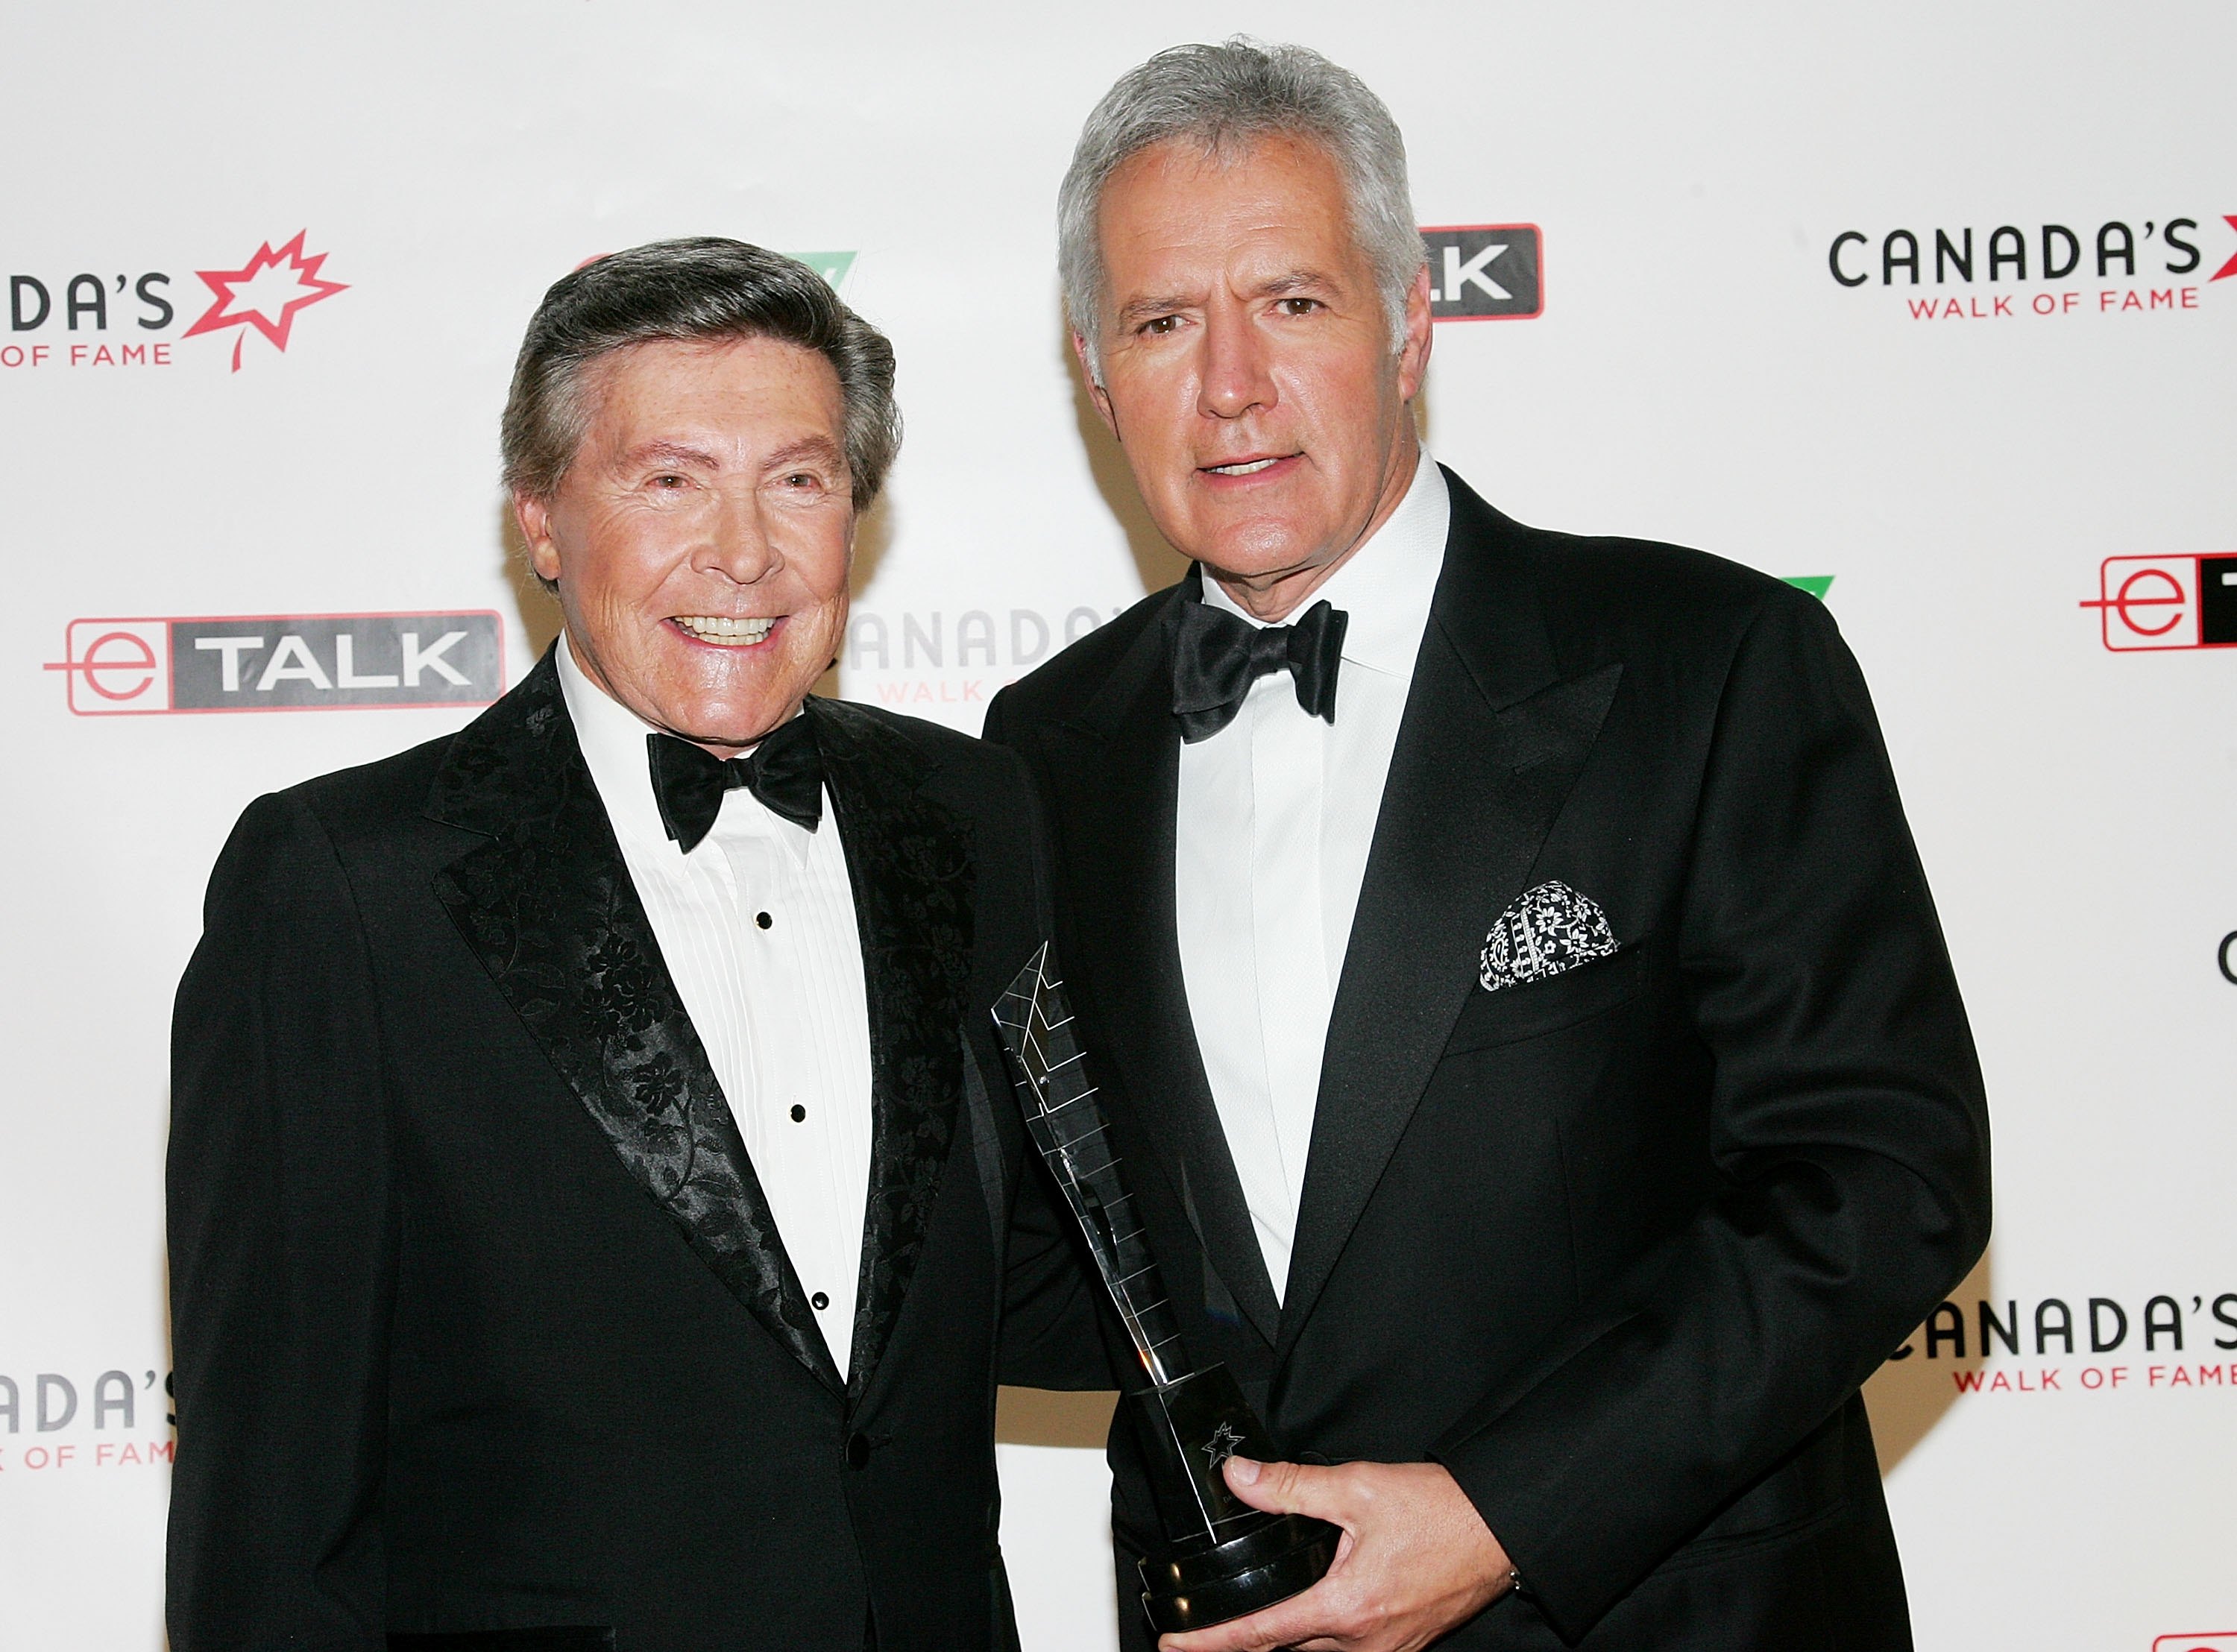 Presenter Johnny Gilbert and honoree Alex Trebek of 'Jeopardy!' attend Canada's Walk Of Fame Gala sponsored by Chanel at the HummingBird Centre 